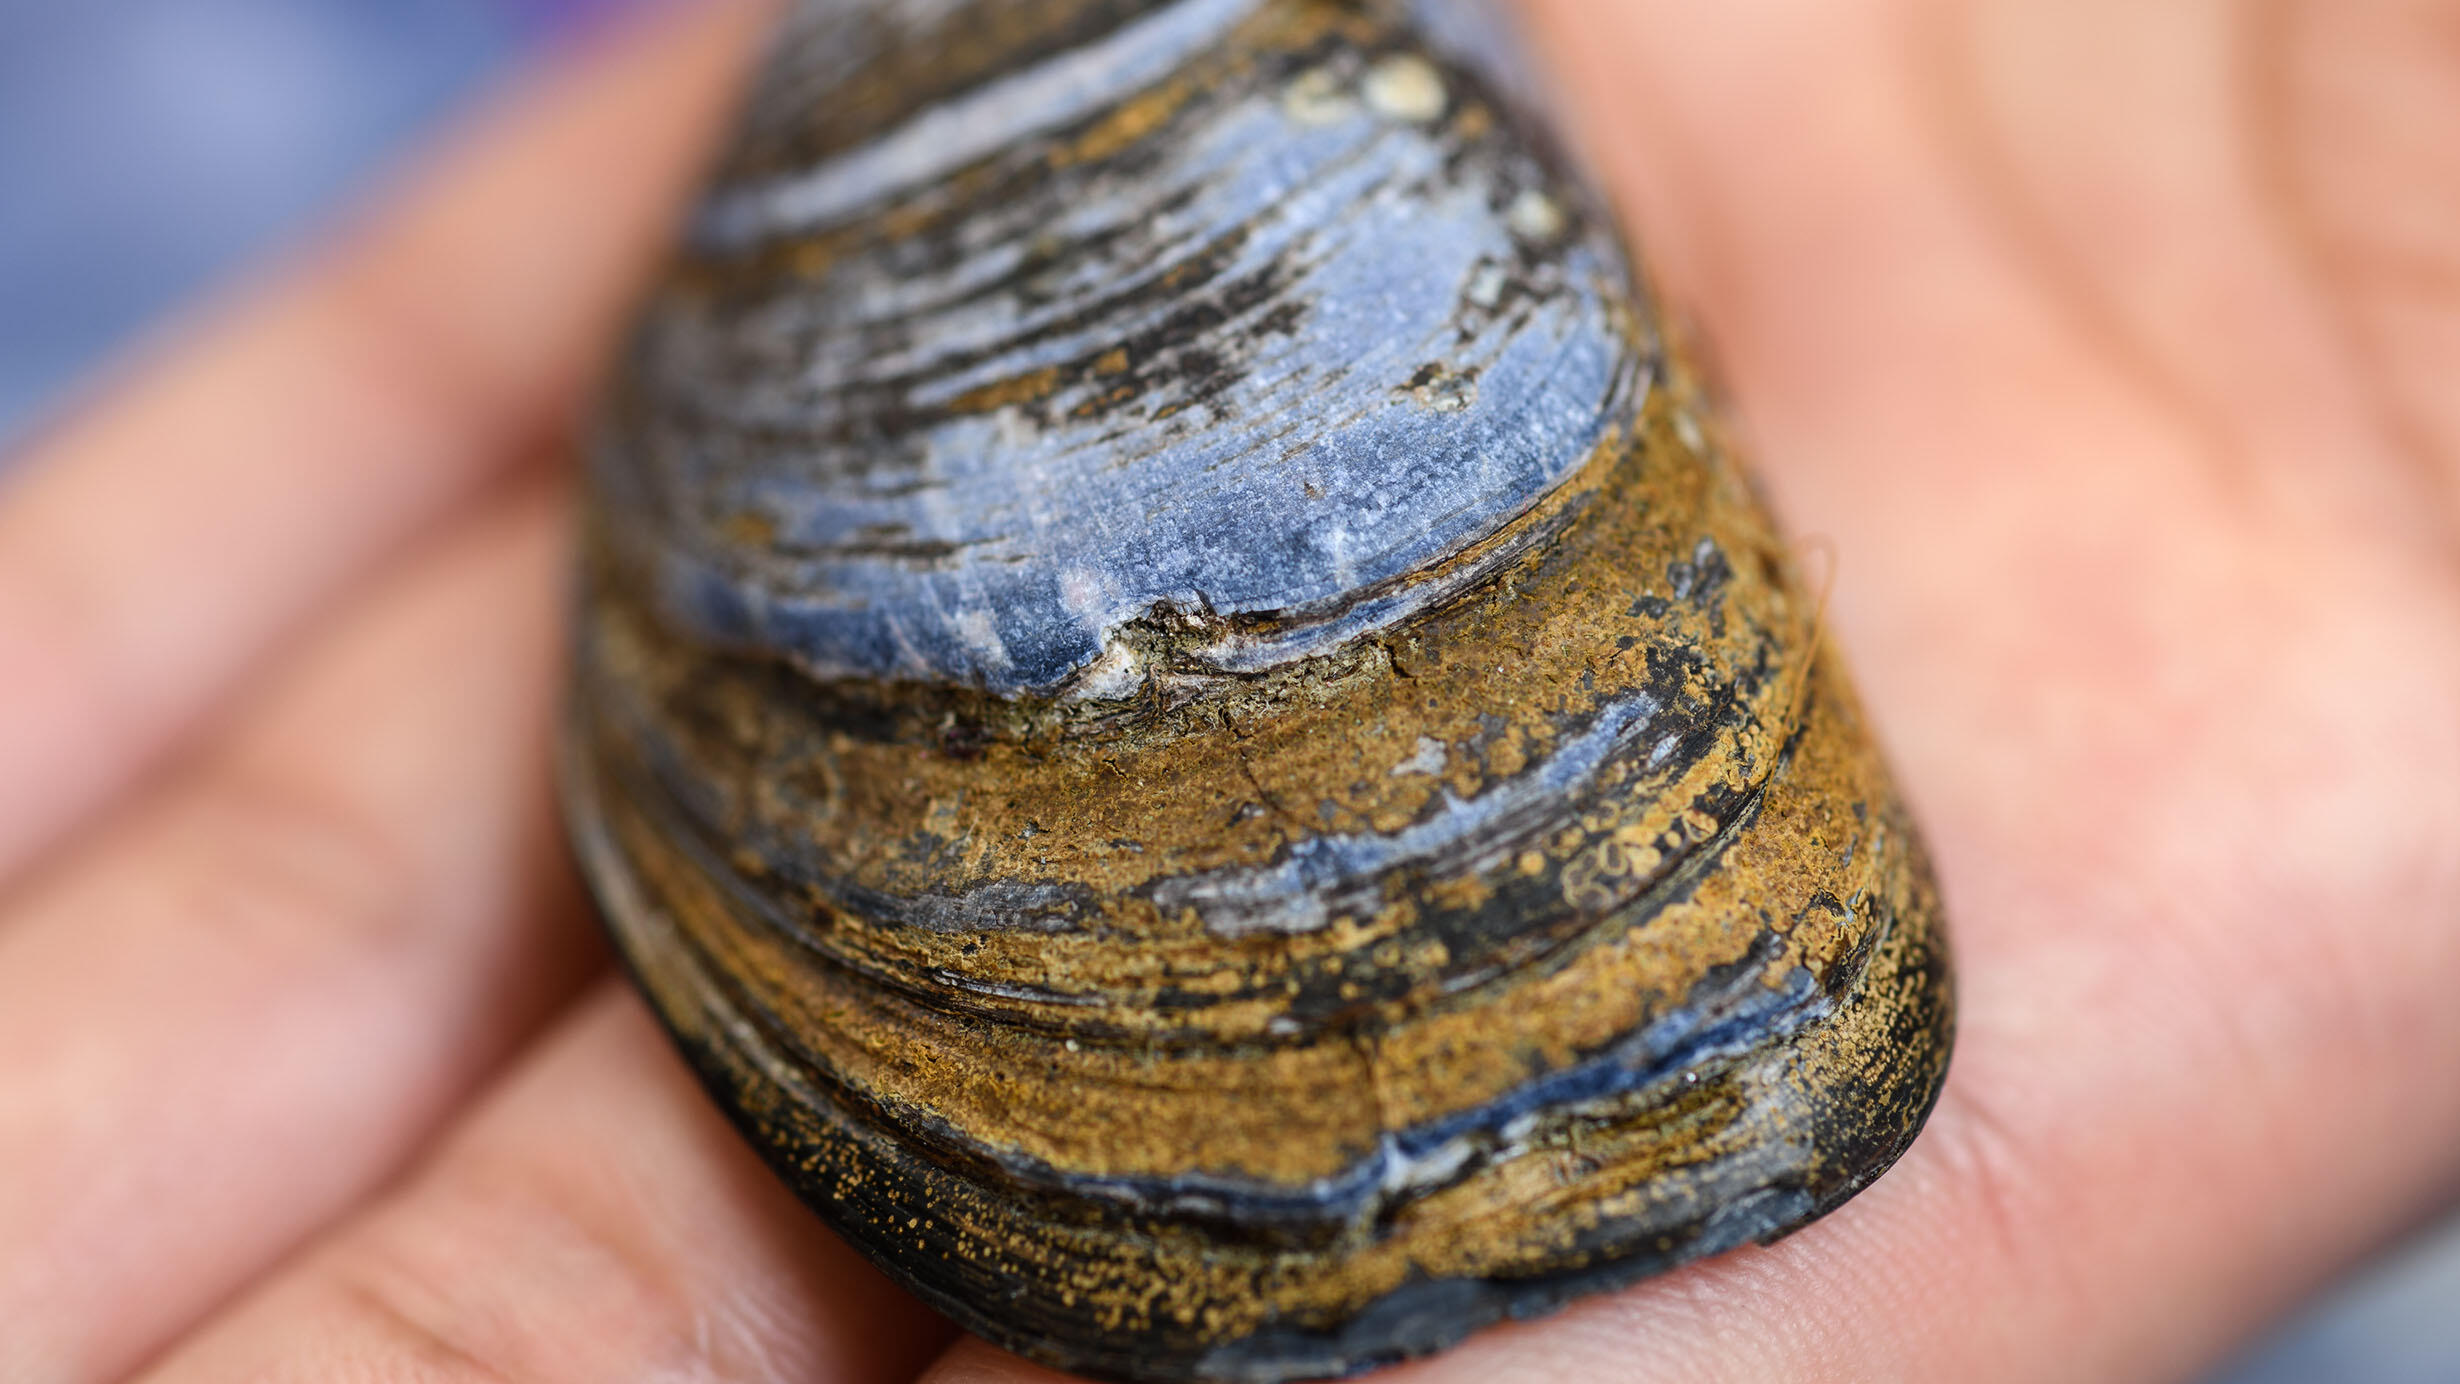 Close-up on a mussel shell on someone's hand.